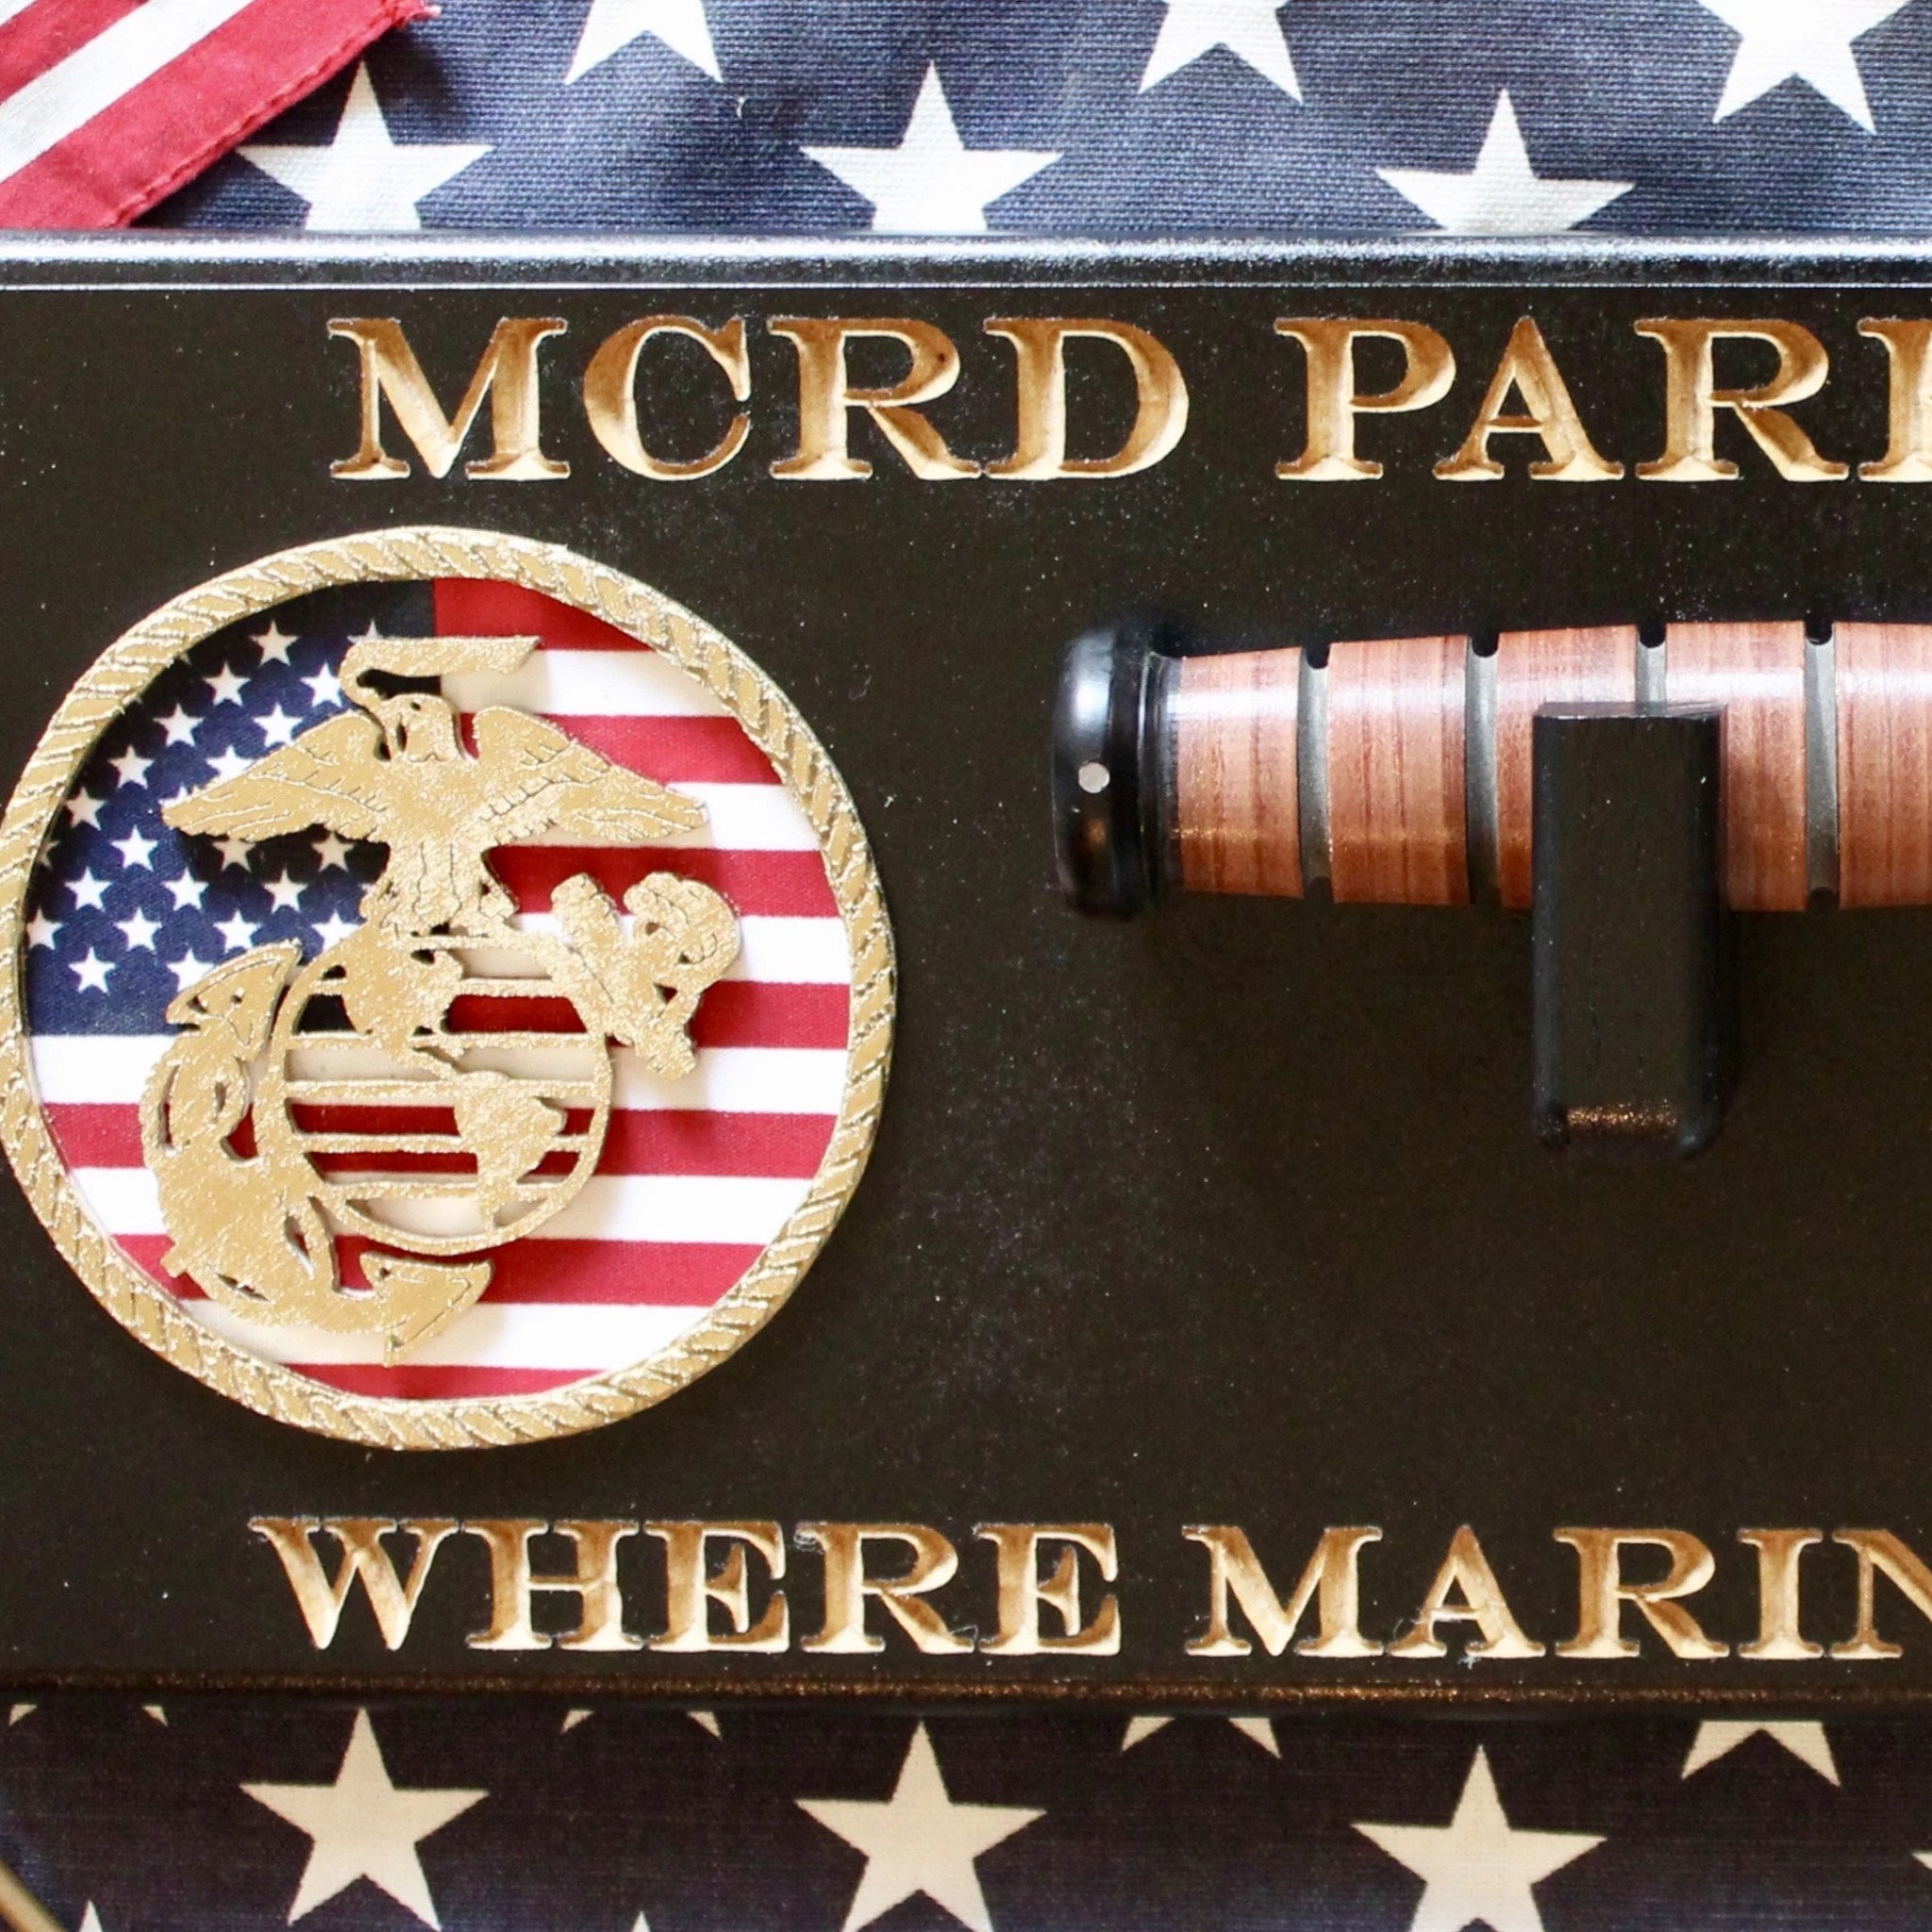 Graduation Gift Ideas For Army Boot Camp
 USMC Boot Camp Graduation Display Military Gifts Made of